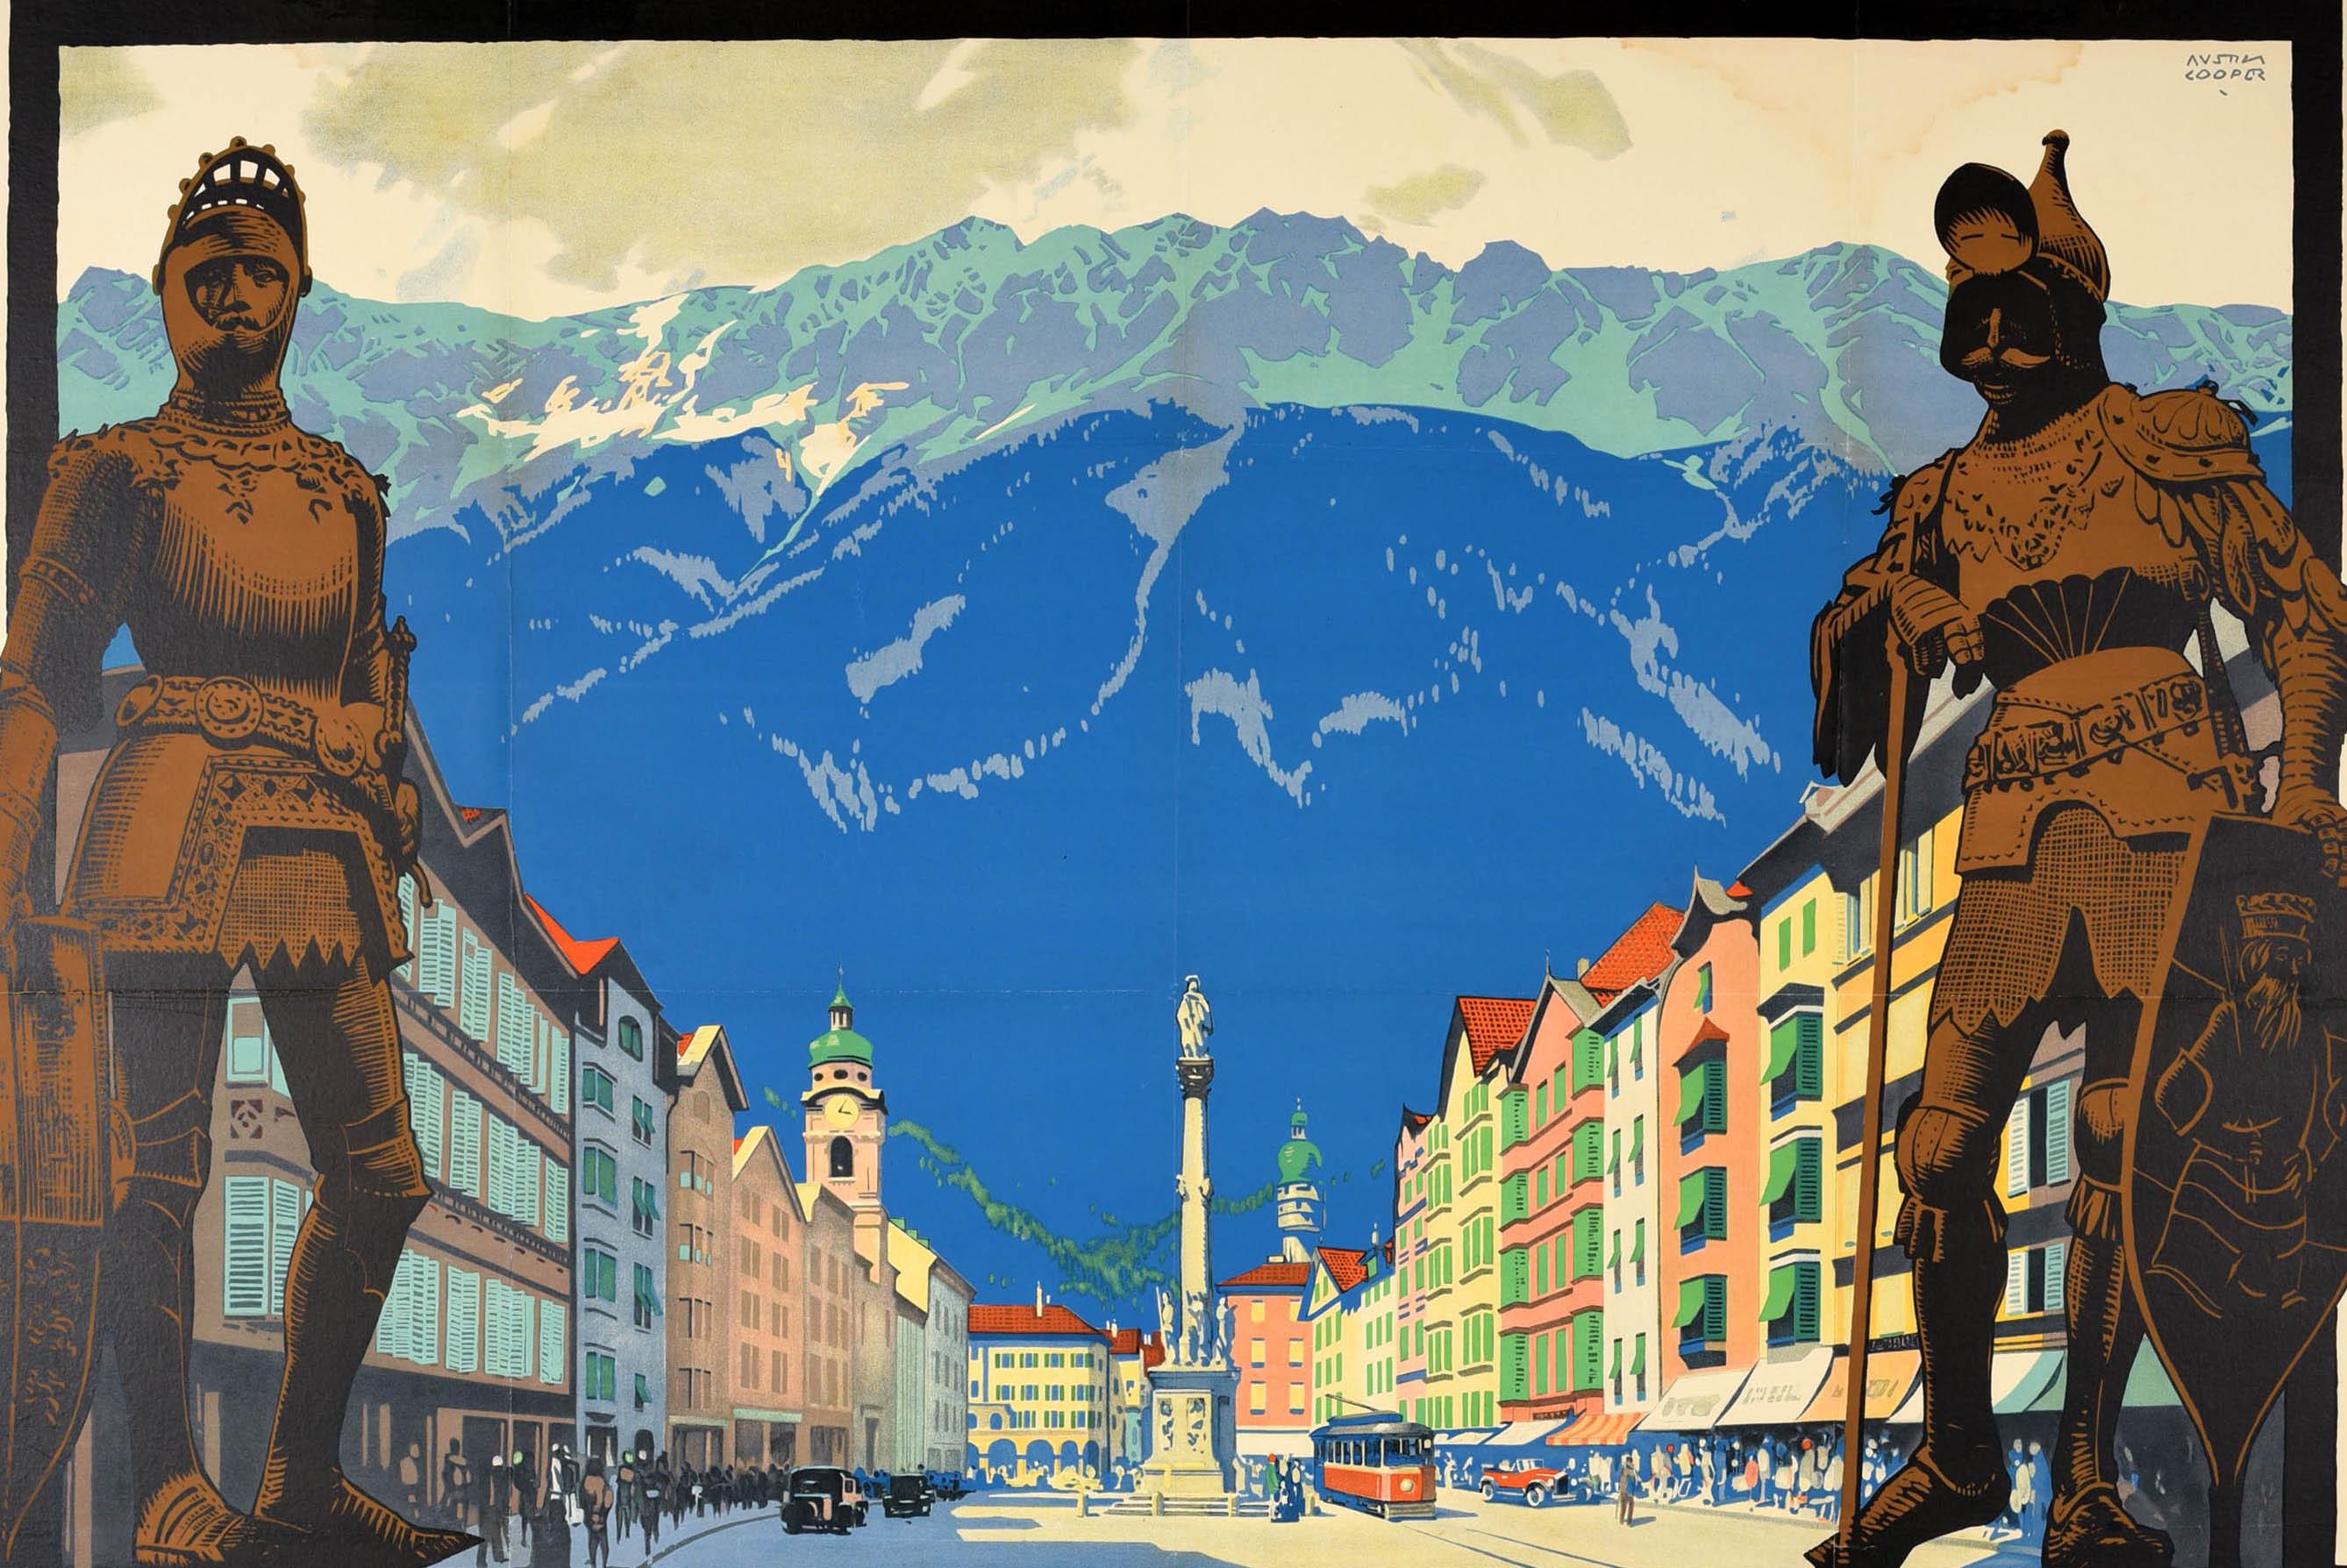 Original vintage railway travel poster - Innsbruck via Harwich twice a day - featuring a scenic view along a street lined with buildings and people in the sunshine walking along the pavements under the shop awnings, a tram and classic cars on the